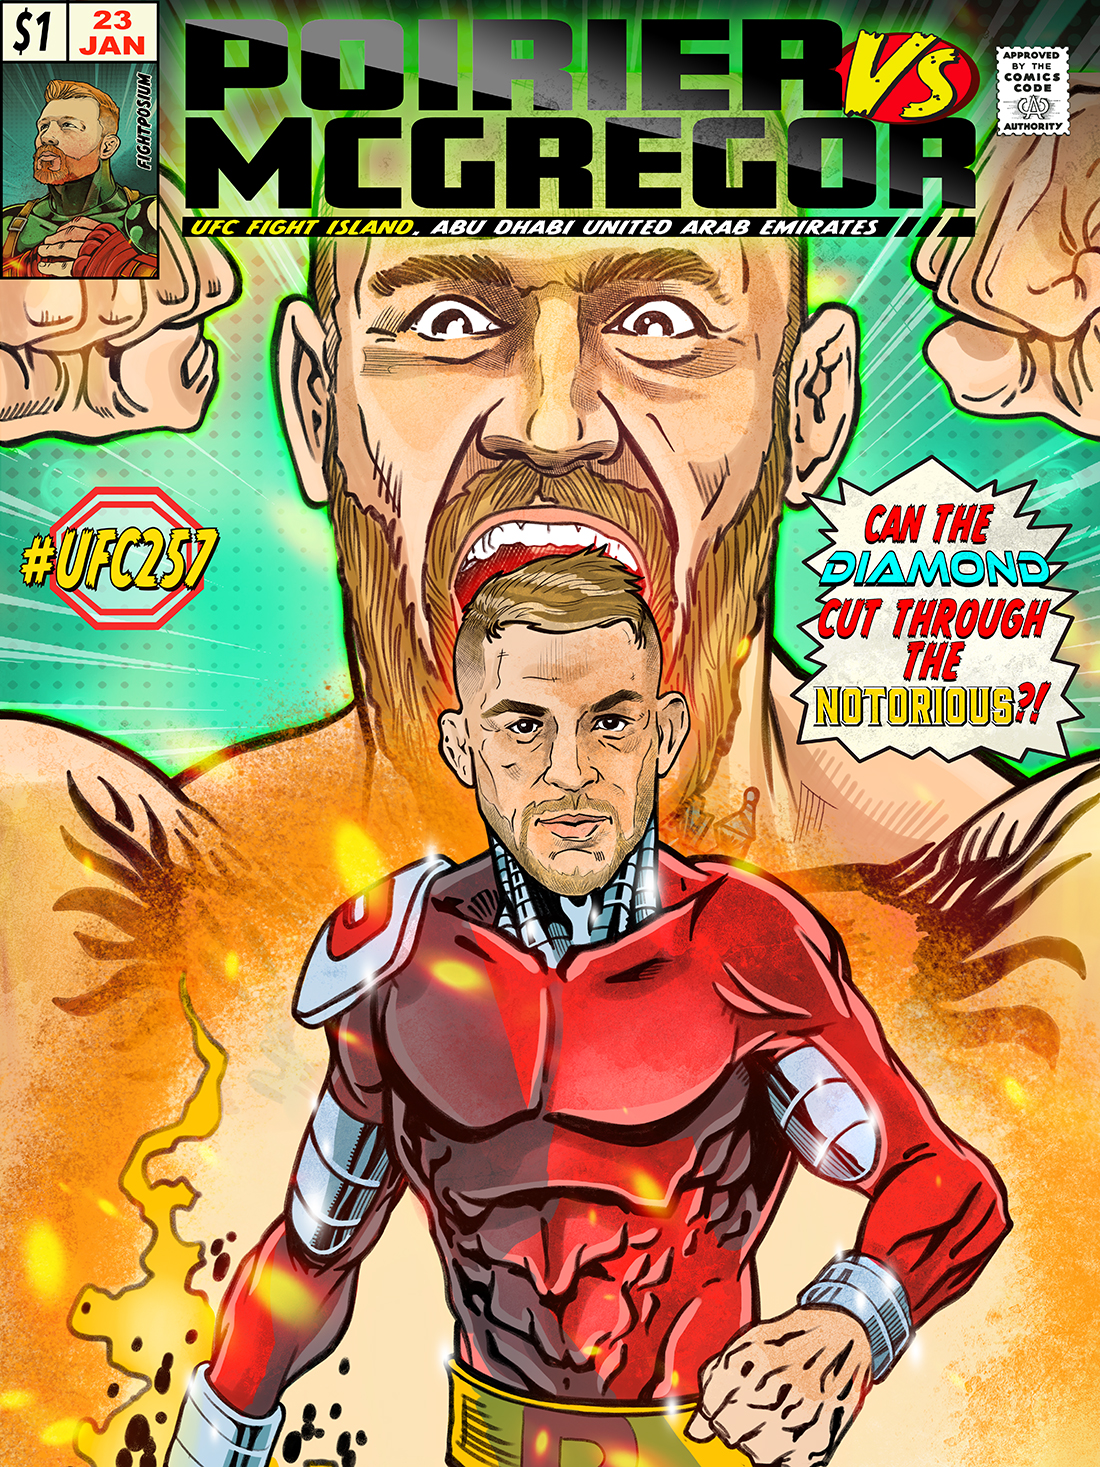 Read more about the article Poirier vs McGregor II – The Diamond vs The Notorious!